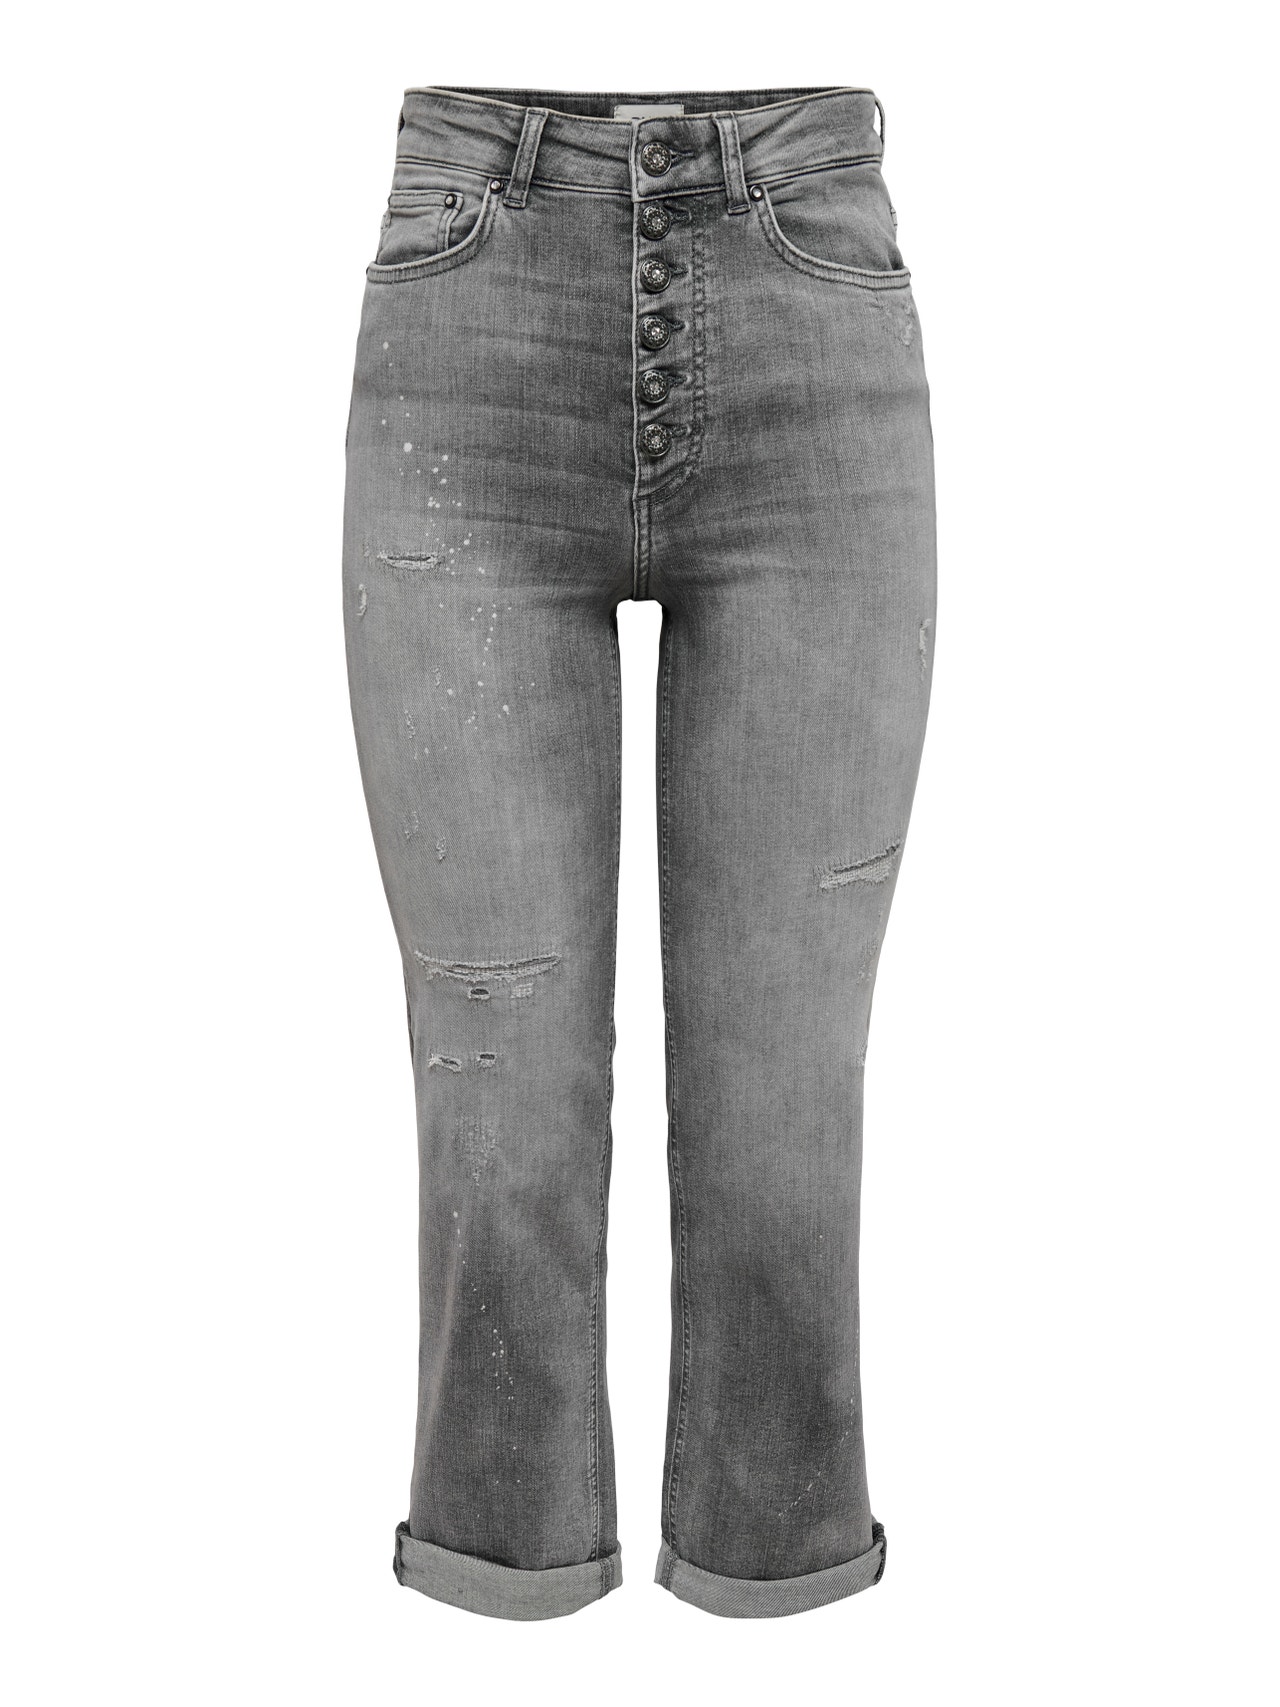 ONLY Straight Fit High waist Petite Jeans -Grey Denim - 15276613